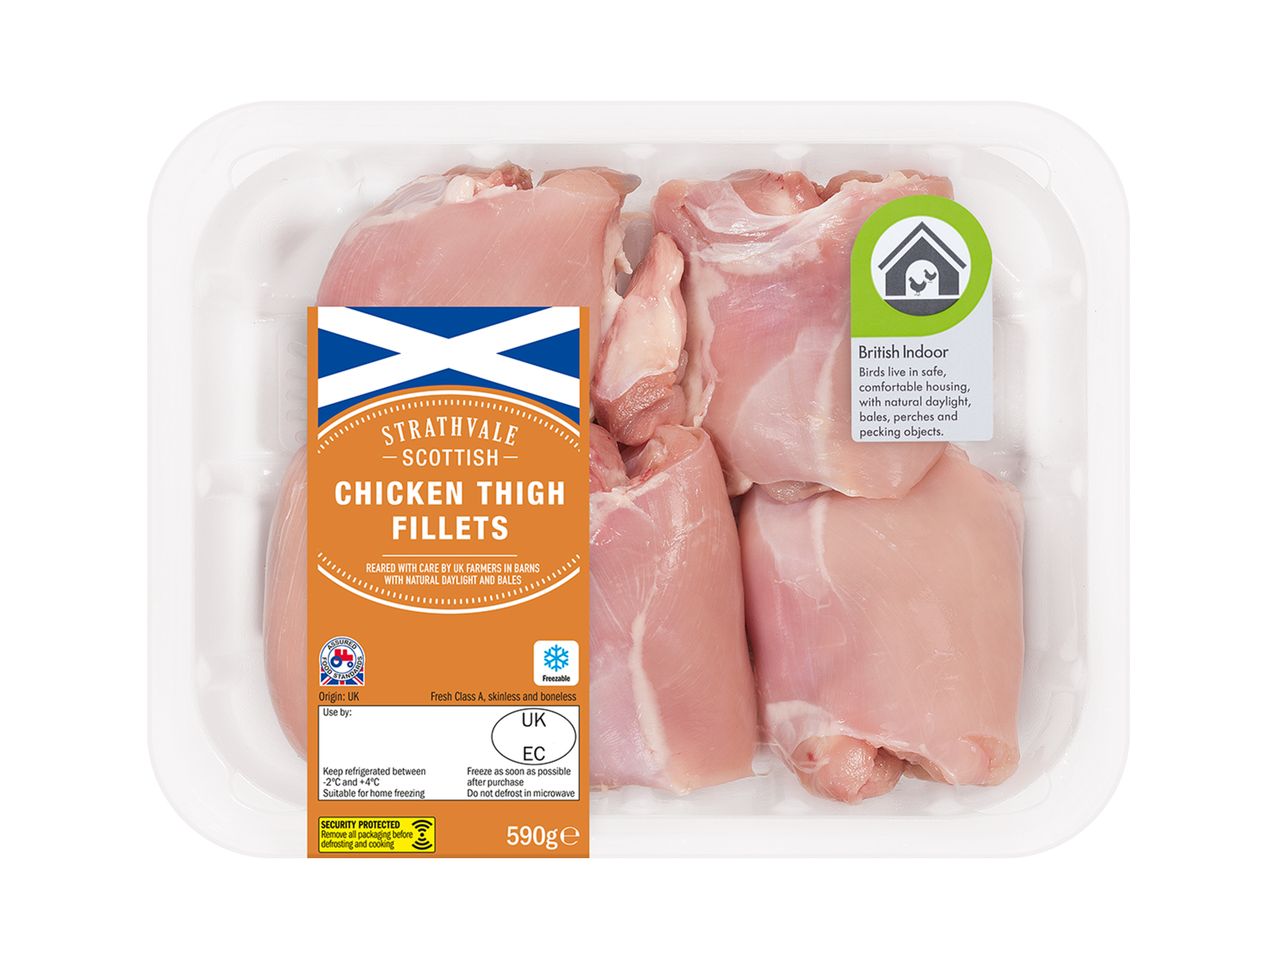 Go to full screen view: Strathvale Scottish Chicken Thigh Fillets - Image 1